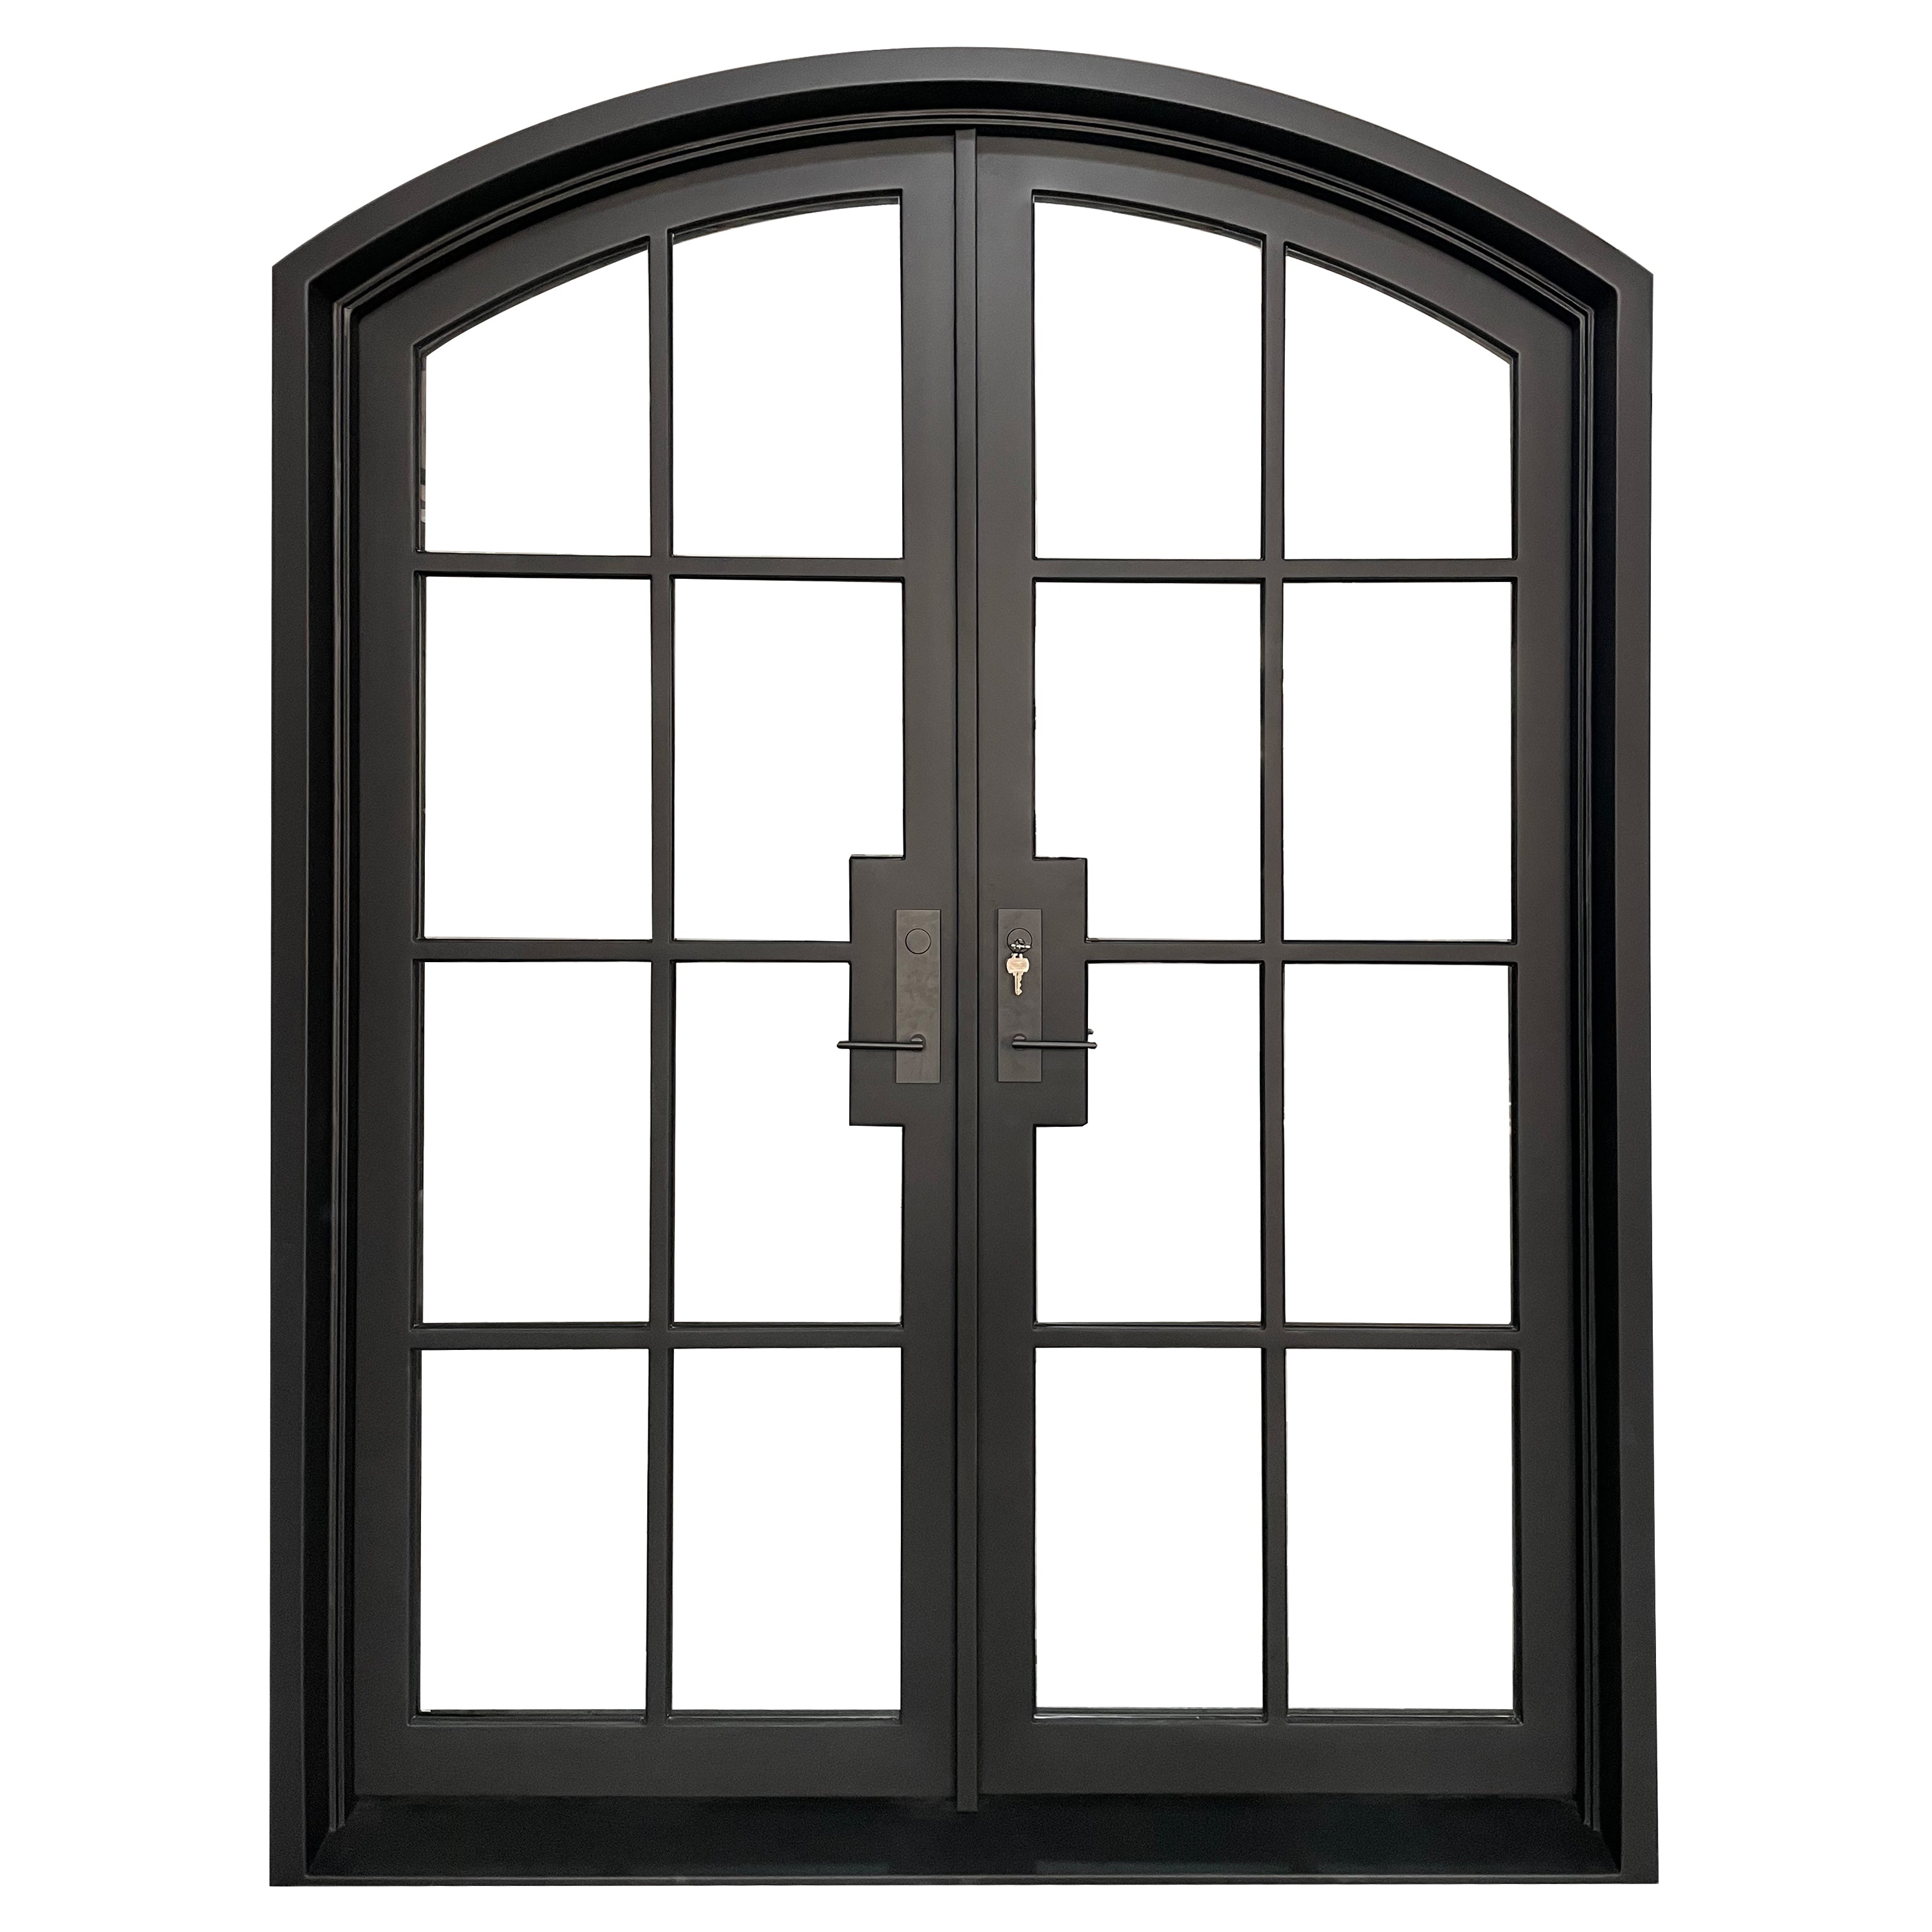 gloryirondoors thermal break neat design double french entry doors with arched top